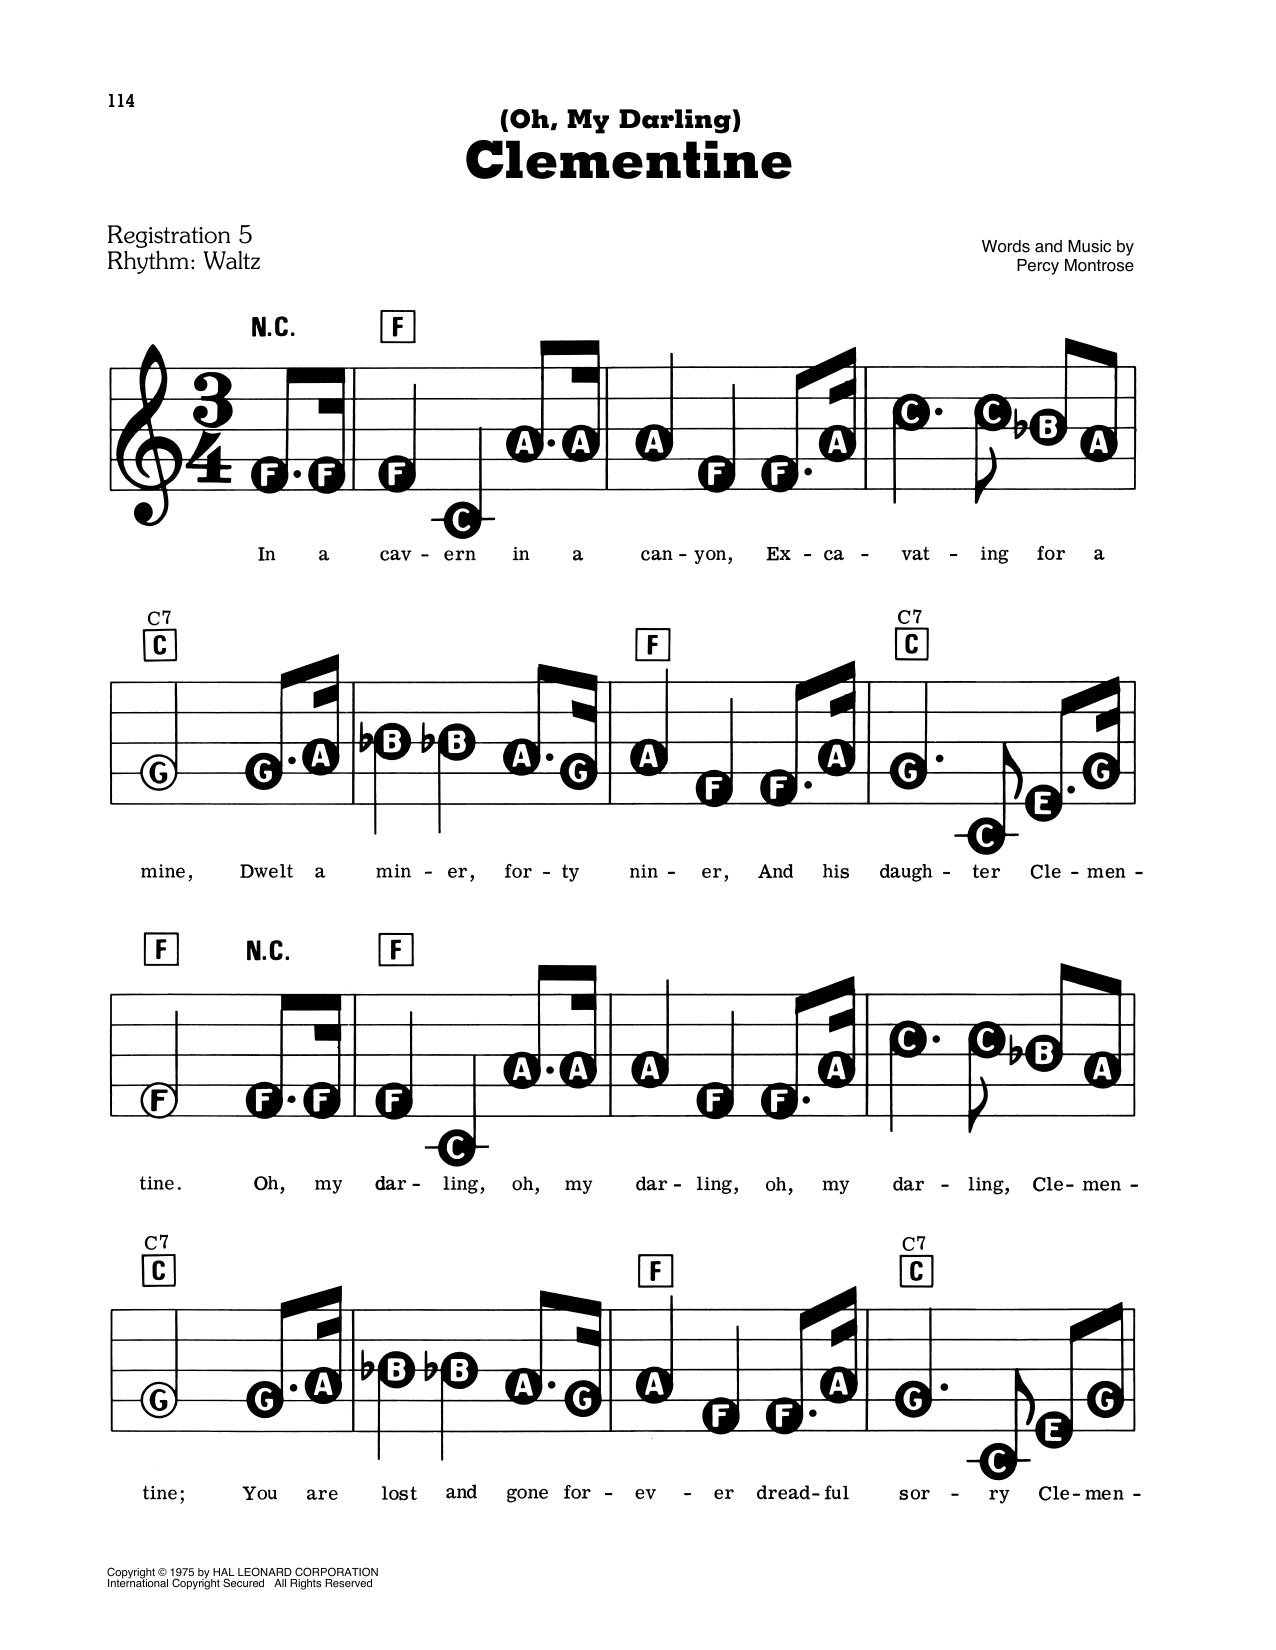 Percy Montrose Oh My Darling Clementine Sheet Music Download Pdf Score